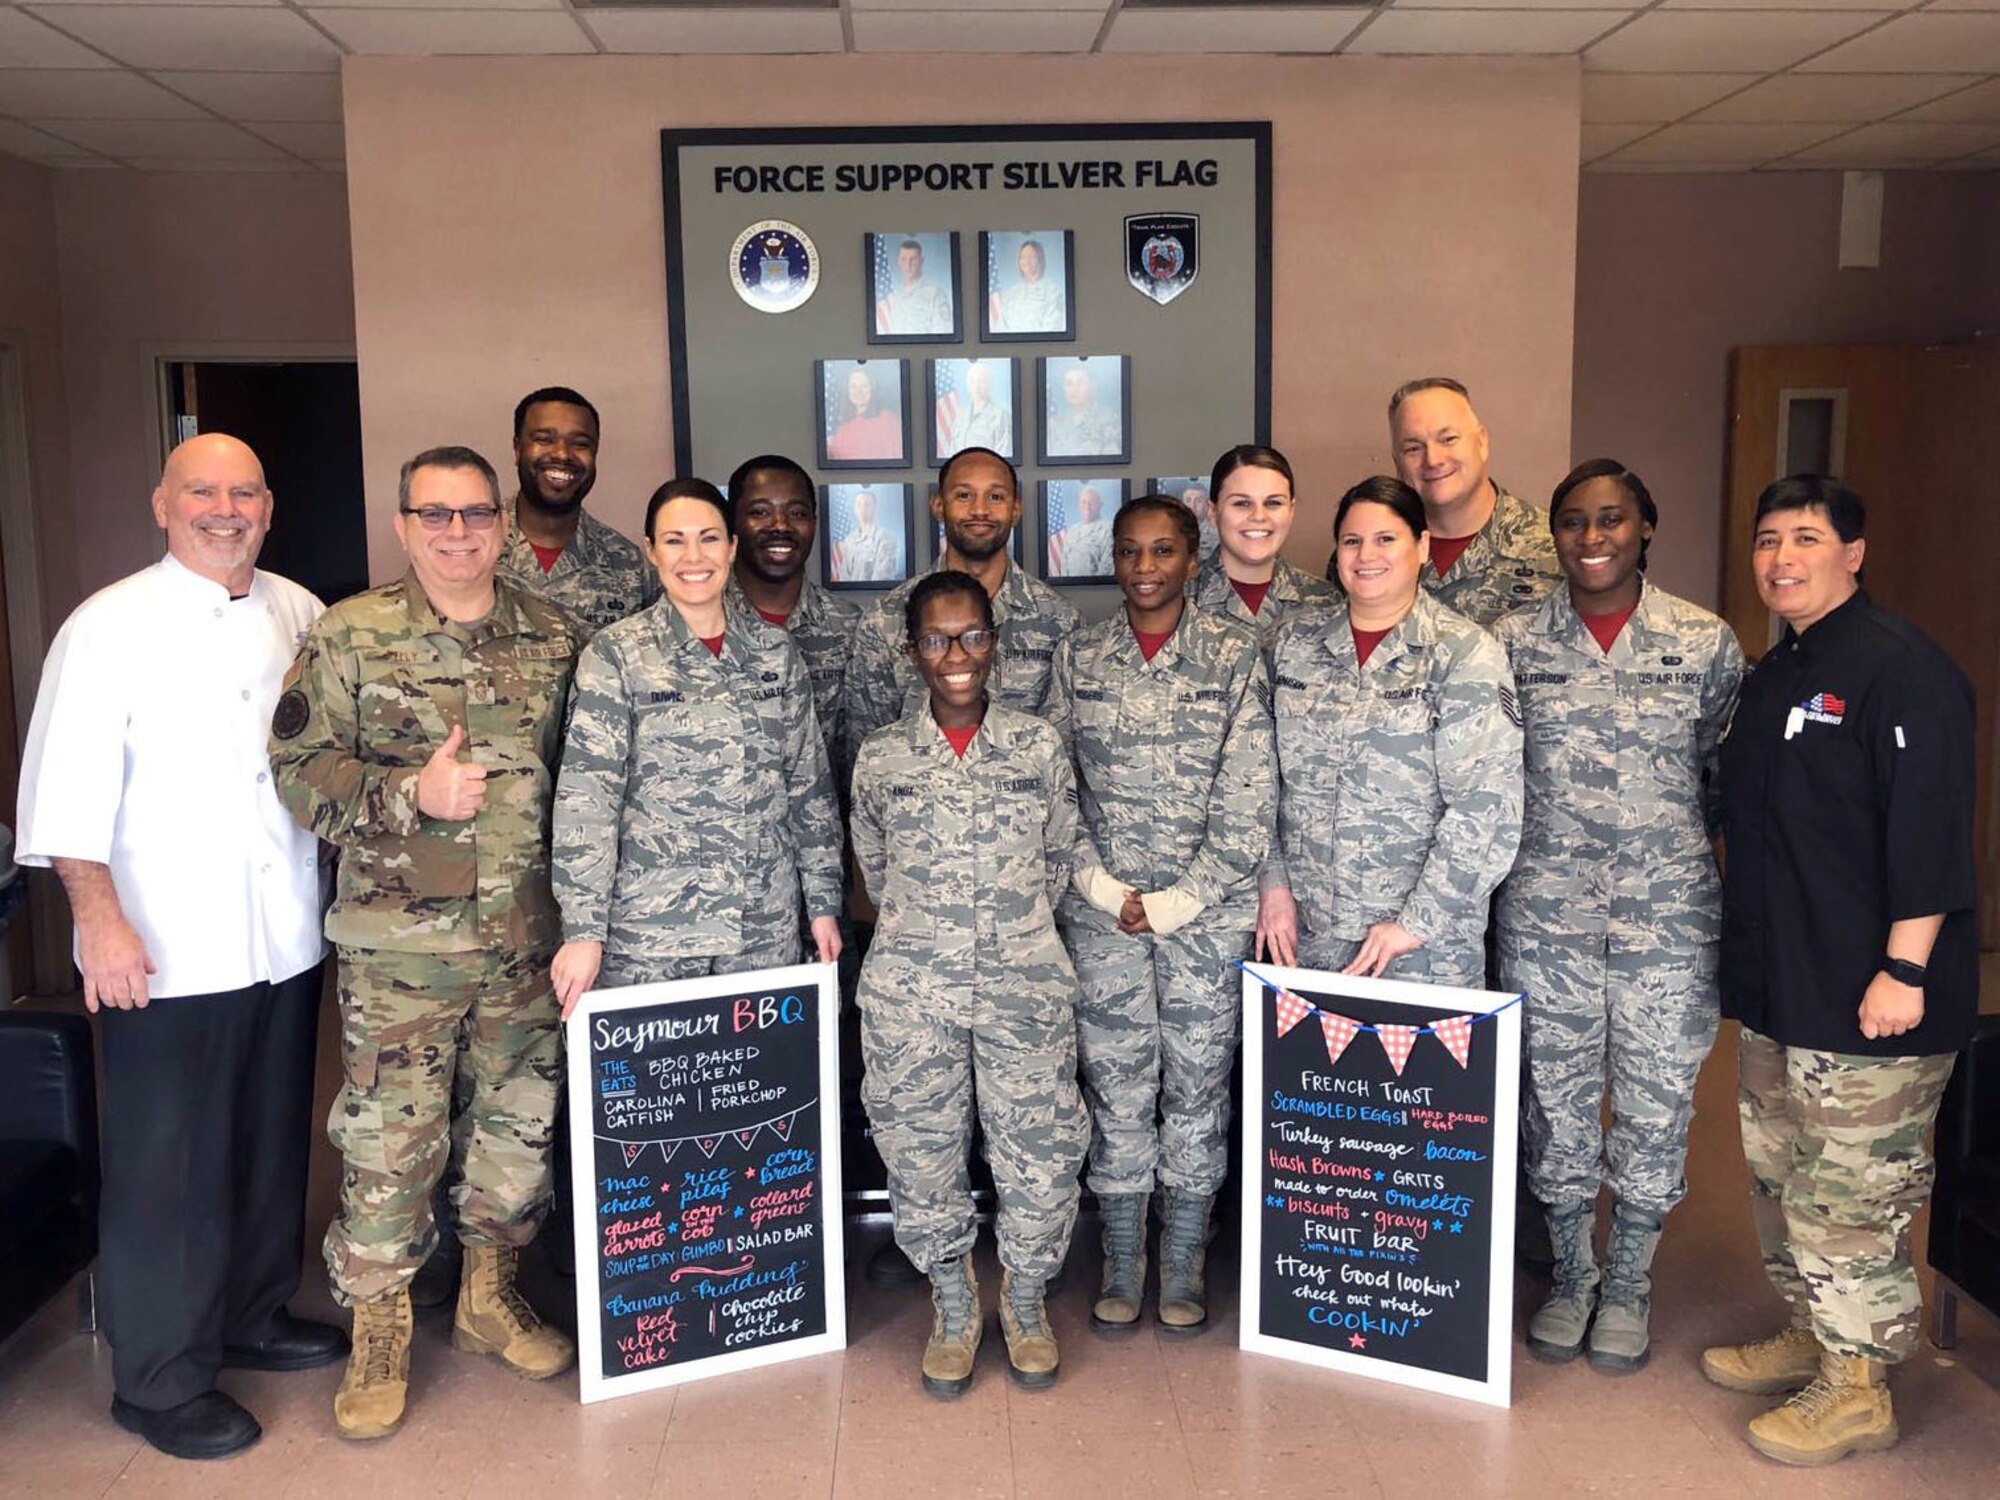 Members of the 916th Force Support Squadron pose for a photo with Hennessy Award judges.